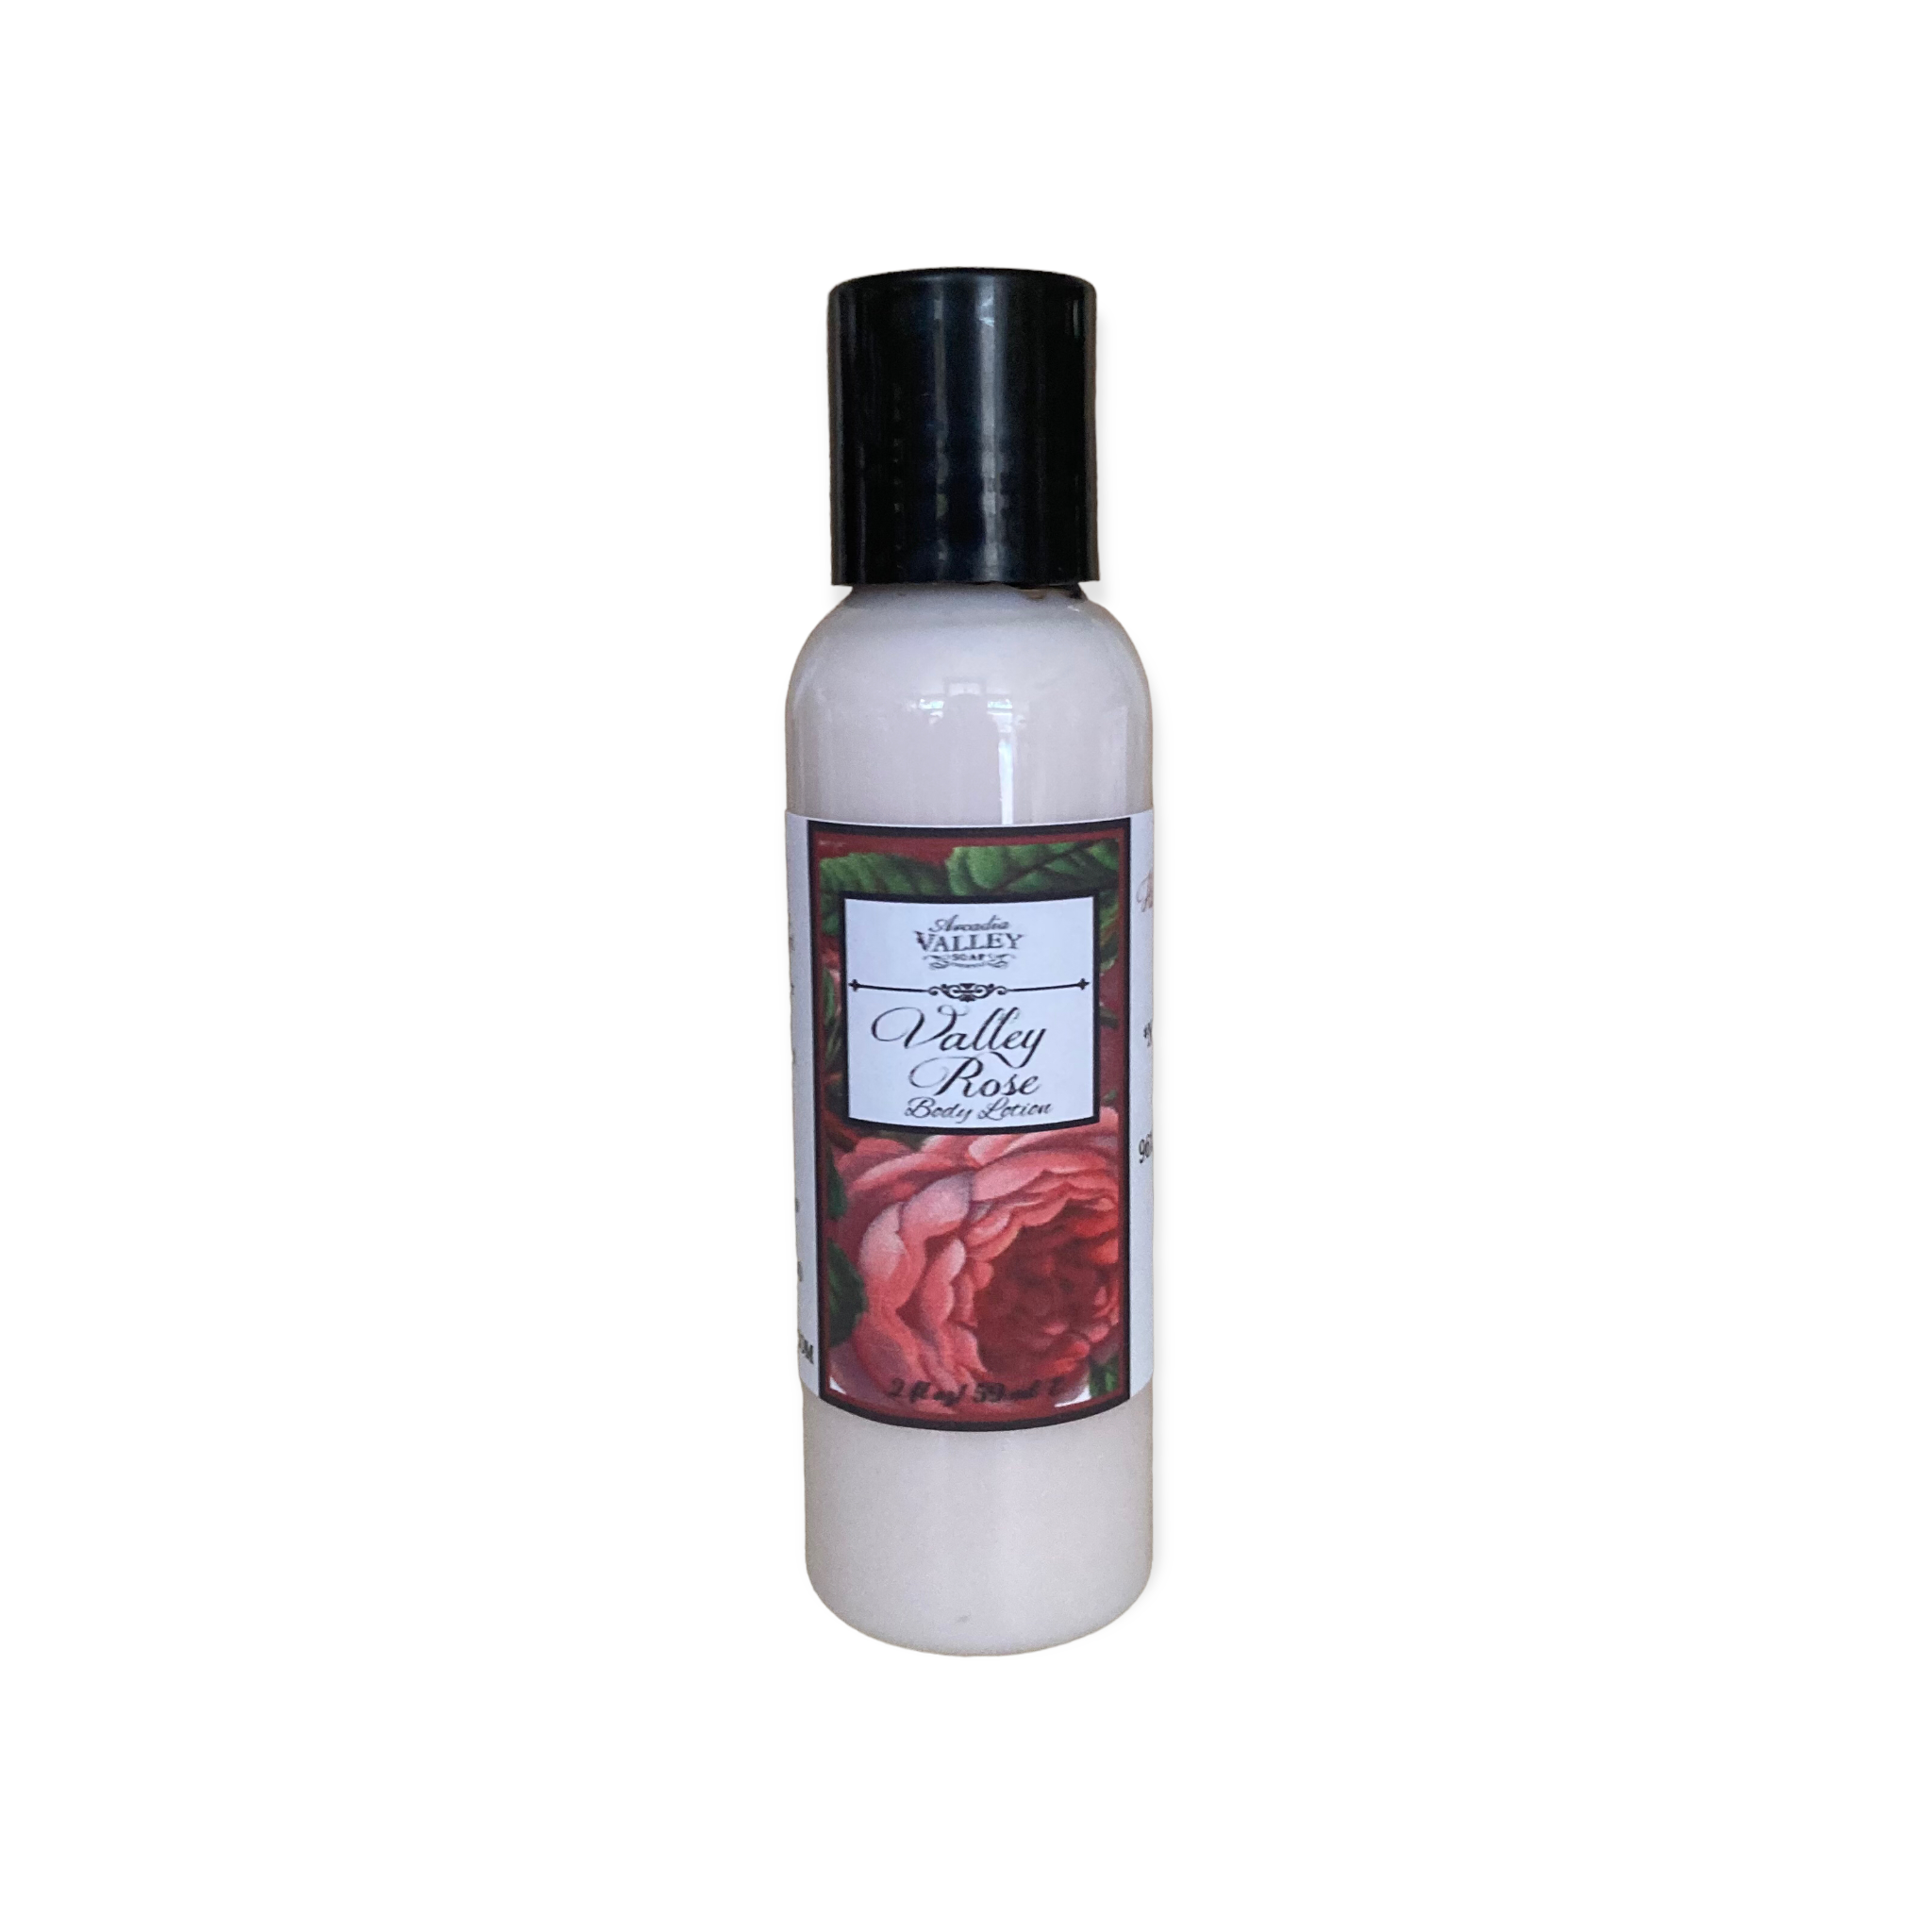 Valley Rose Body Lotion